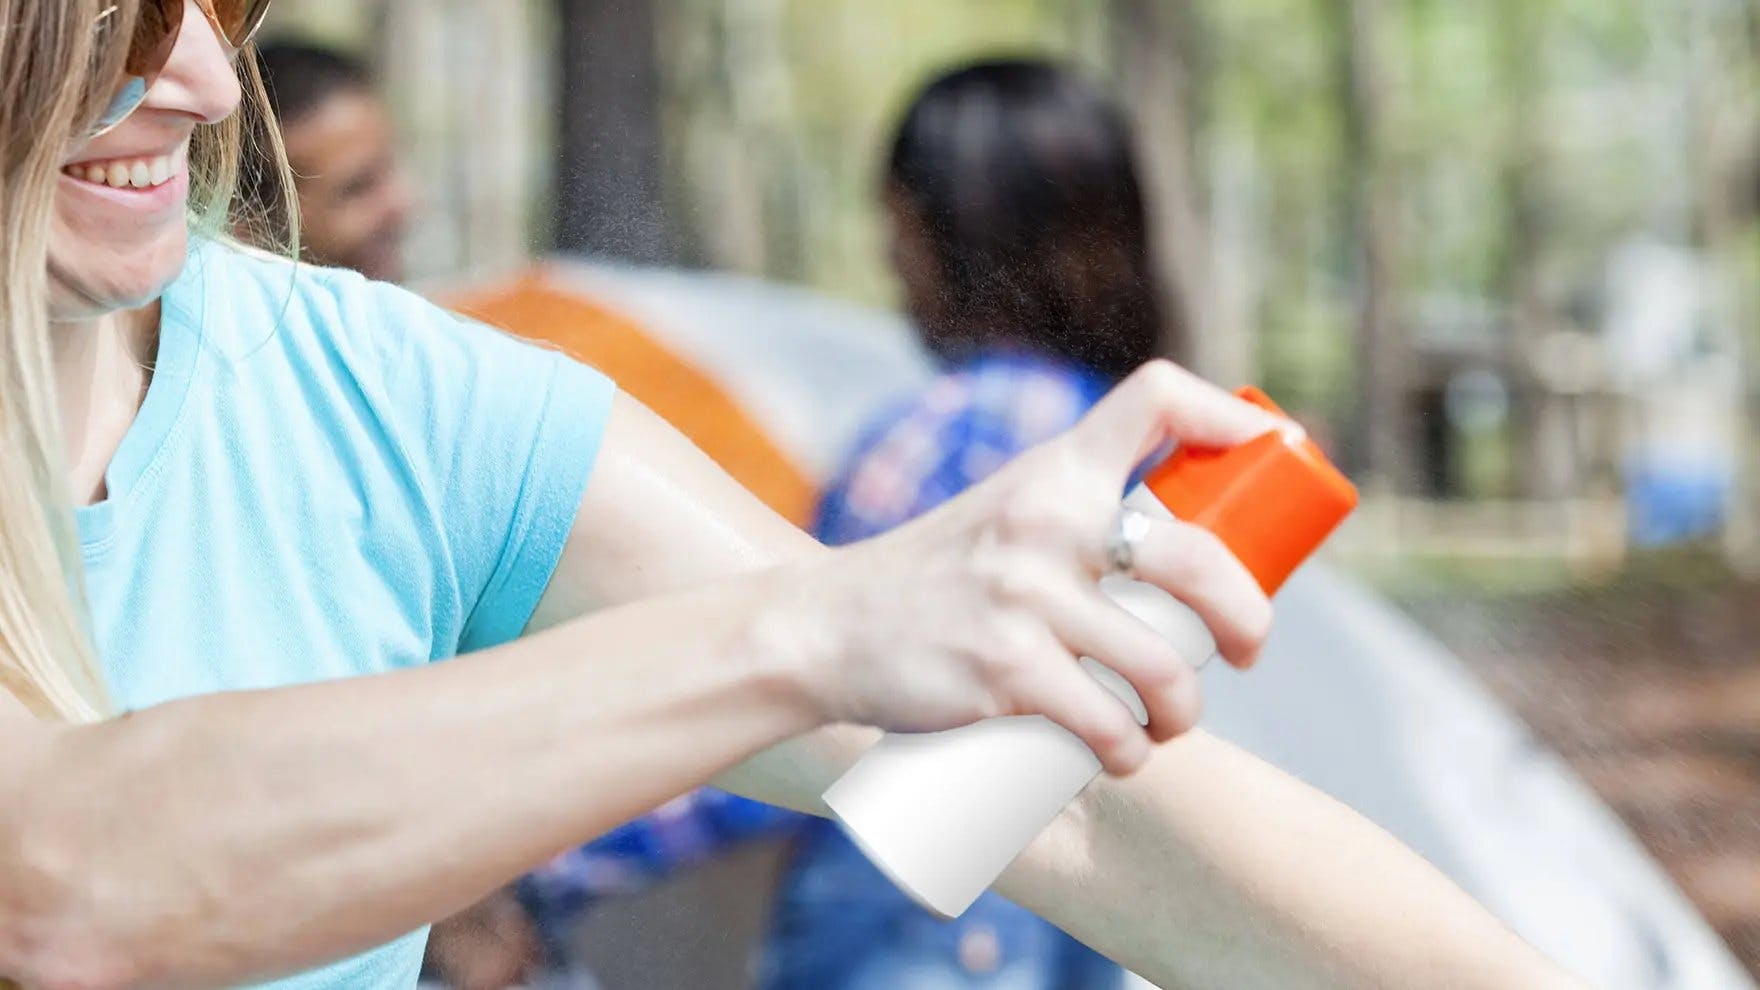 Woman spraying insect repellent on her arm